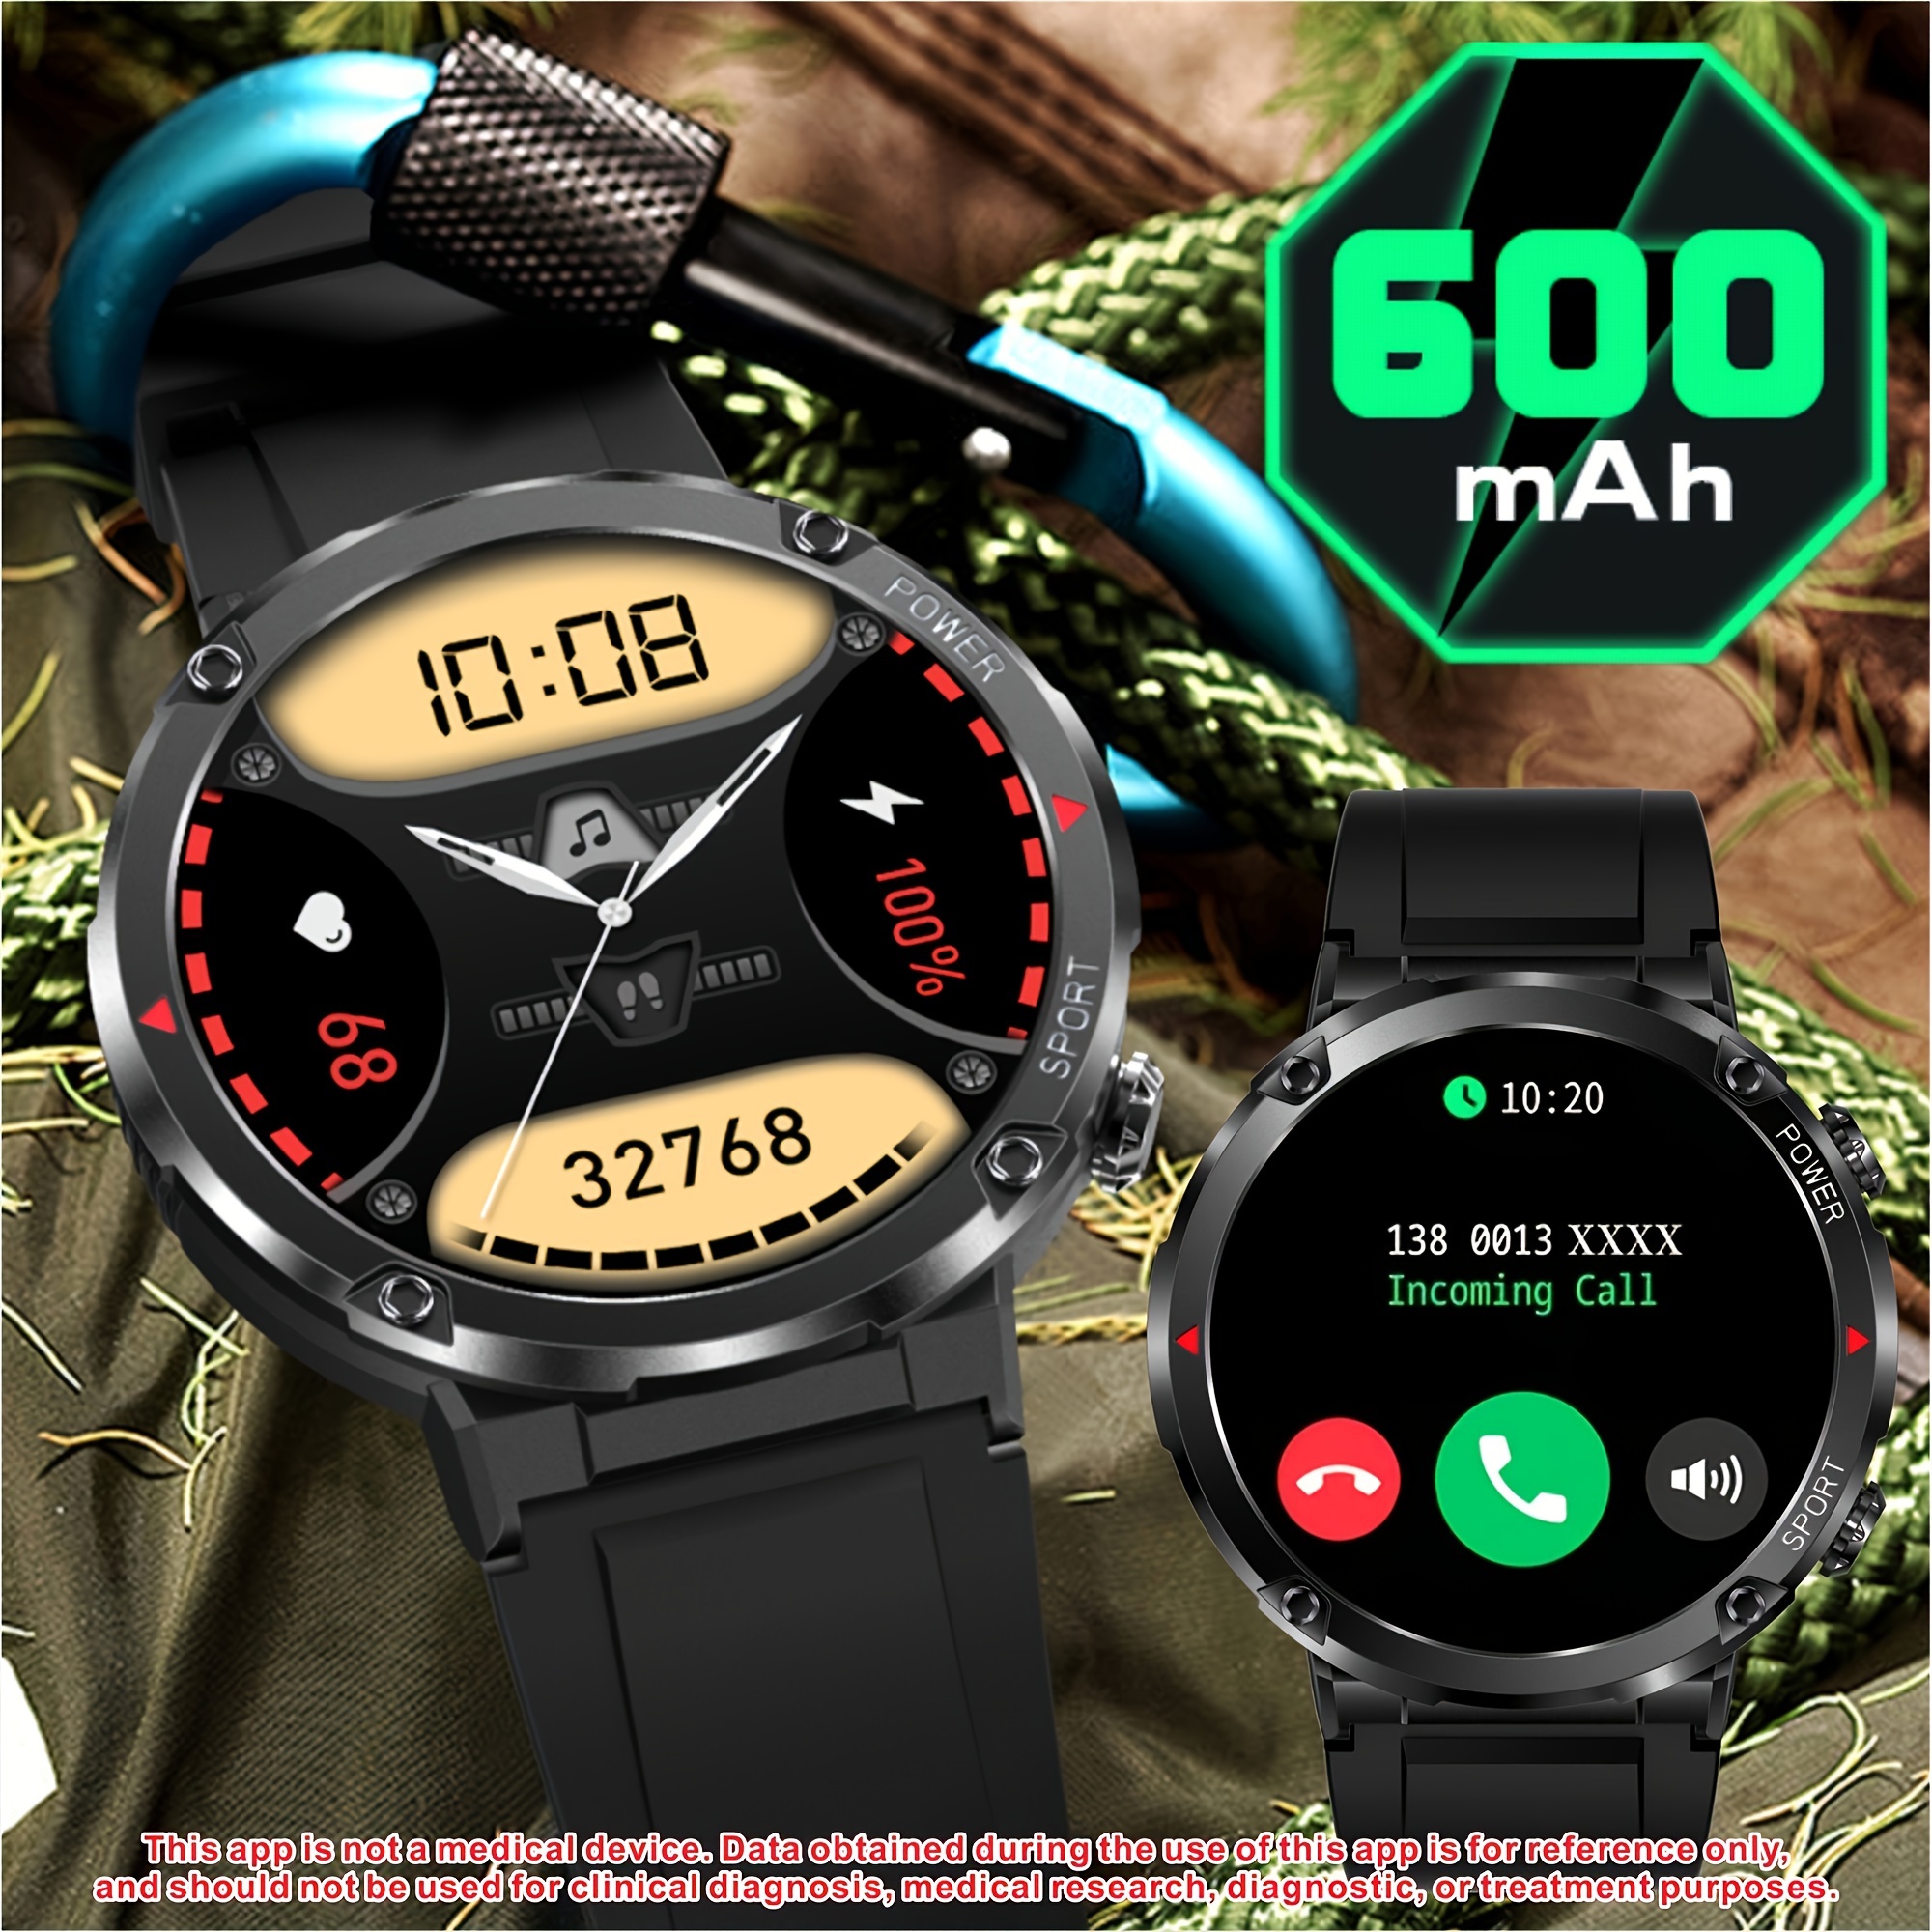 Men's Outdoor Sports Smartwatch Answering/making Calls, Suitable For IPhone And Android Phones, 1.6-inch Full Touch Screen, 600mAh Battery, Fitness Tracker